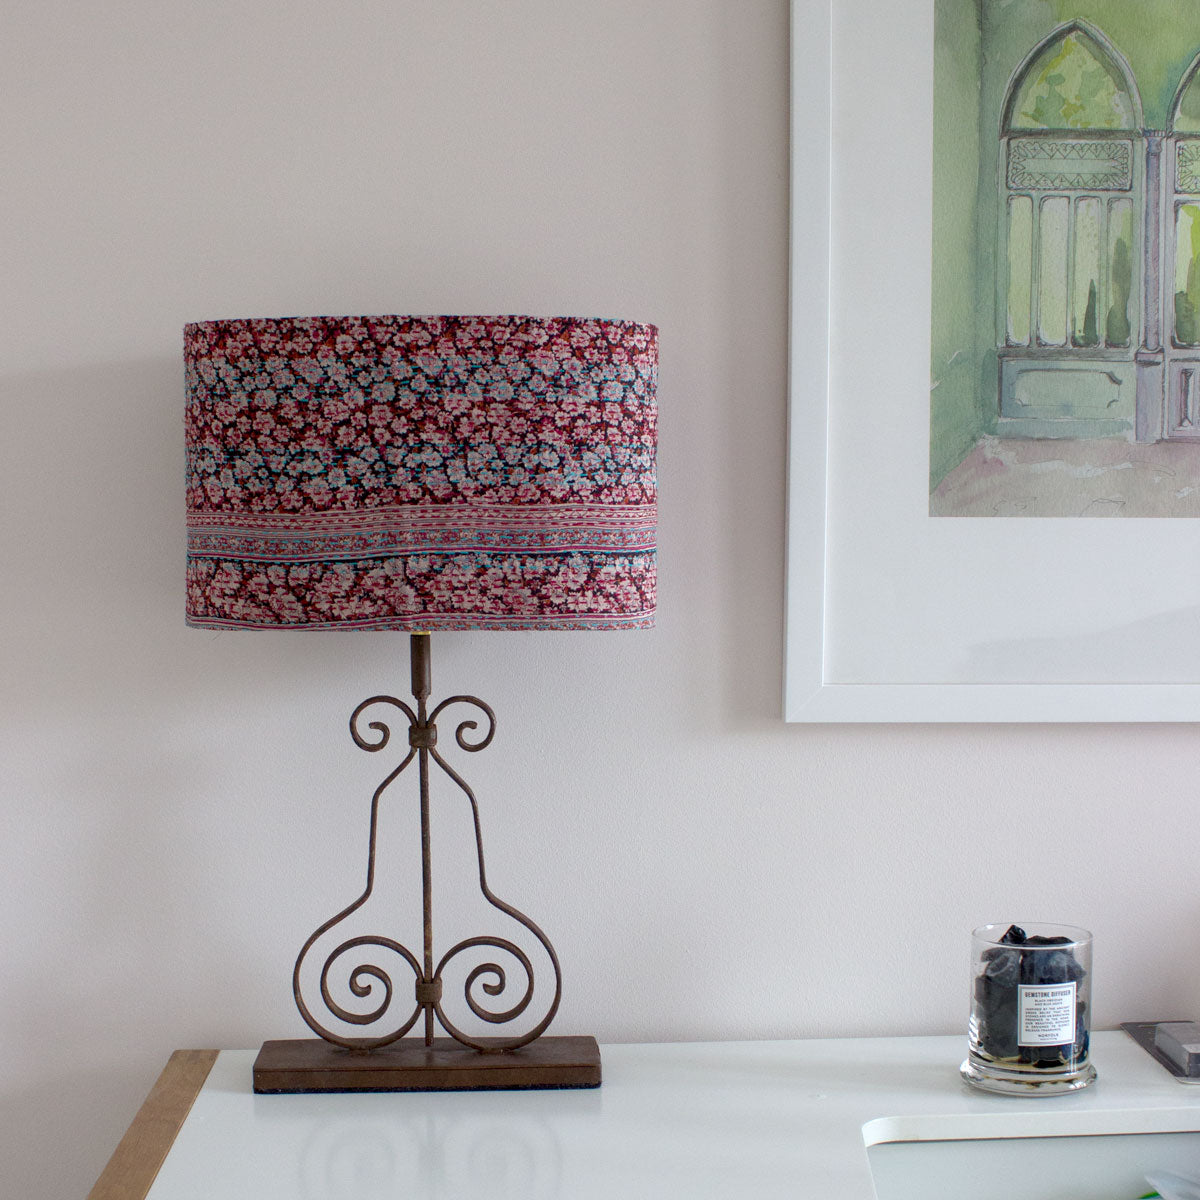 Table lamp Bela upcycled fro architectural salvage and Kantha lampshade